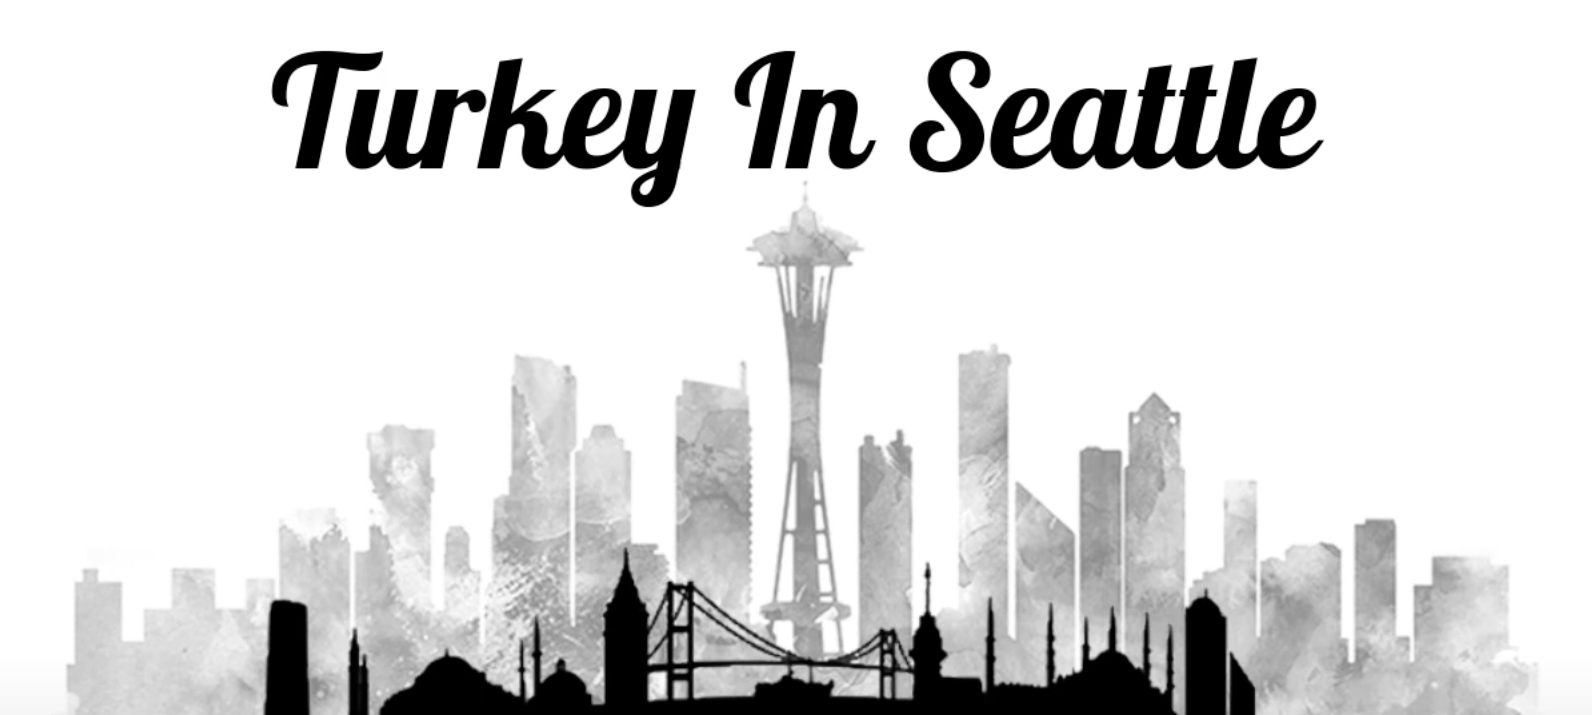 Turkey In Seattle project logo with outline of Seattle skyline